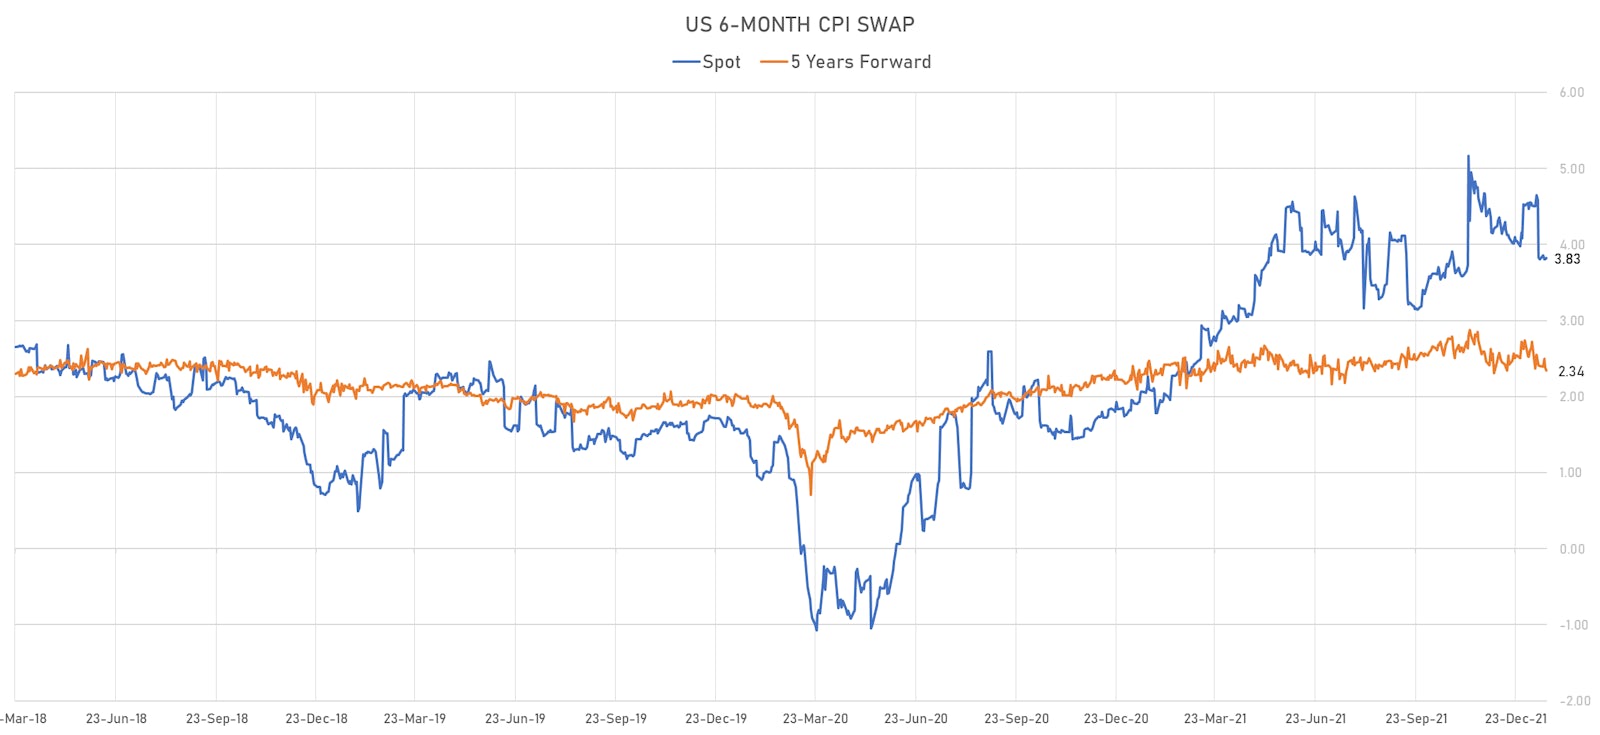 US 6-Month Inflation Swaps (Spot & 5Y Forward) | Sources: ϕpost, Refinitiv data